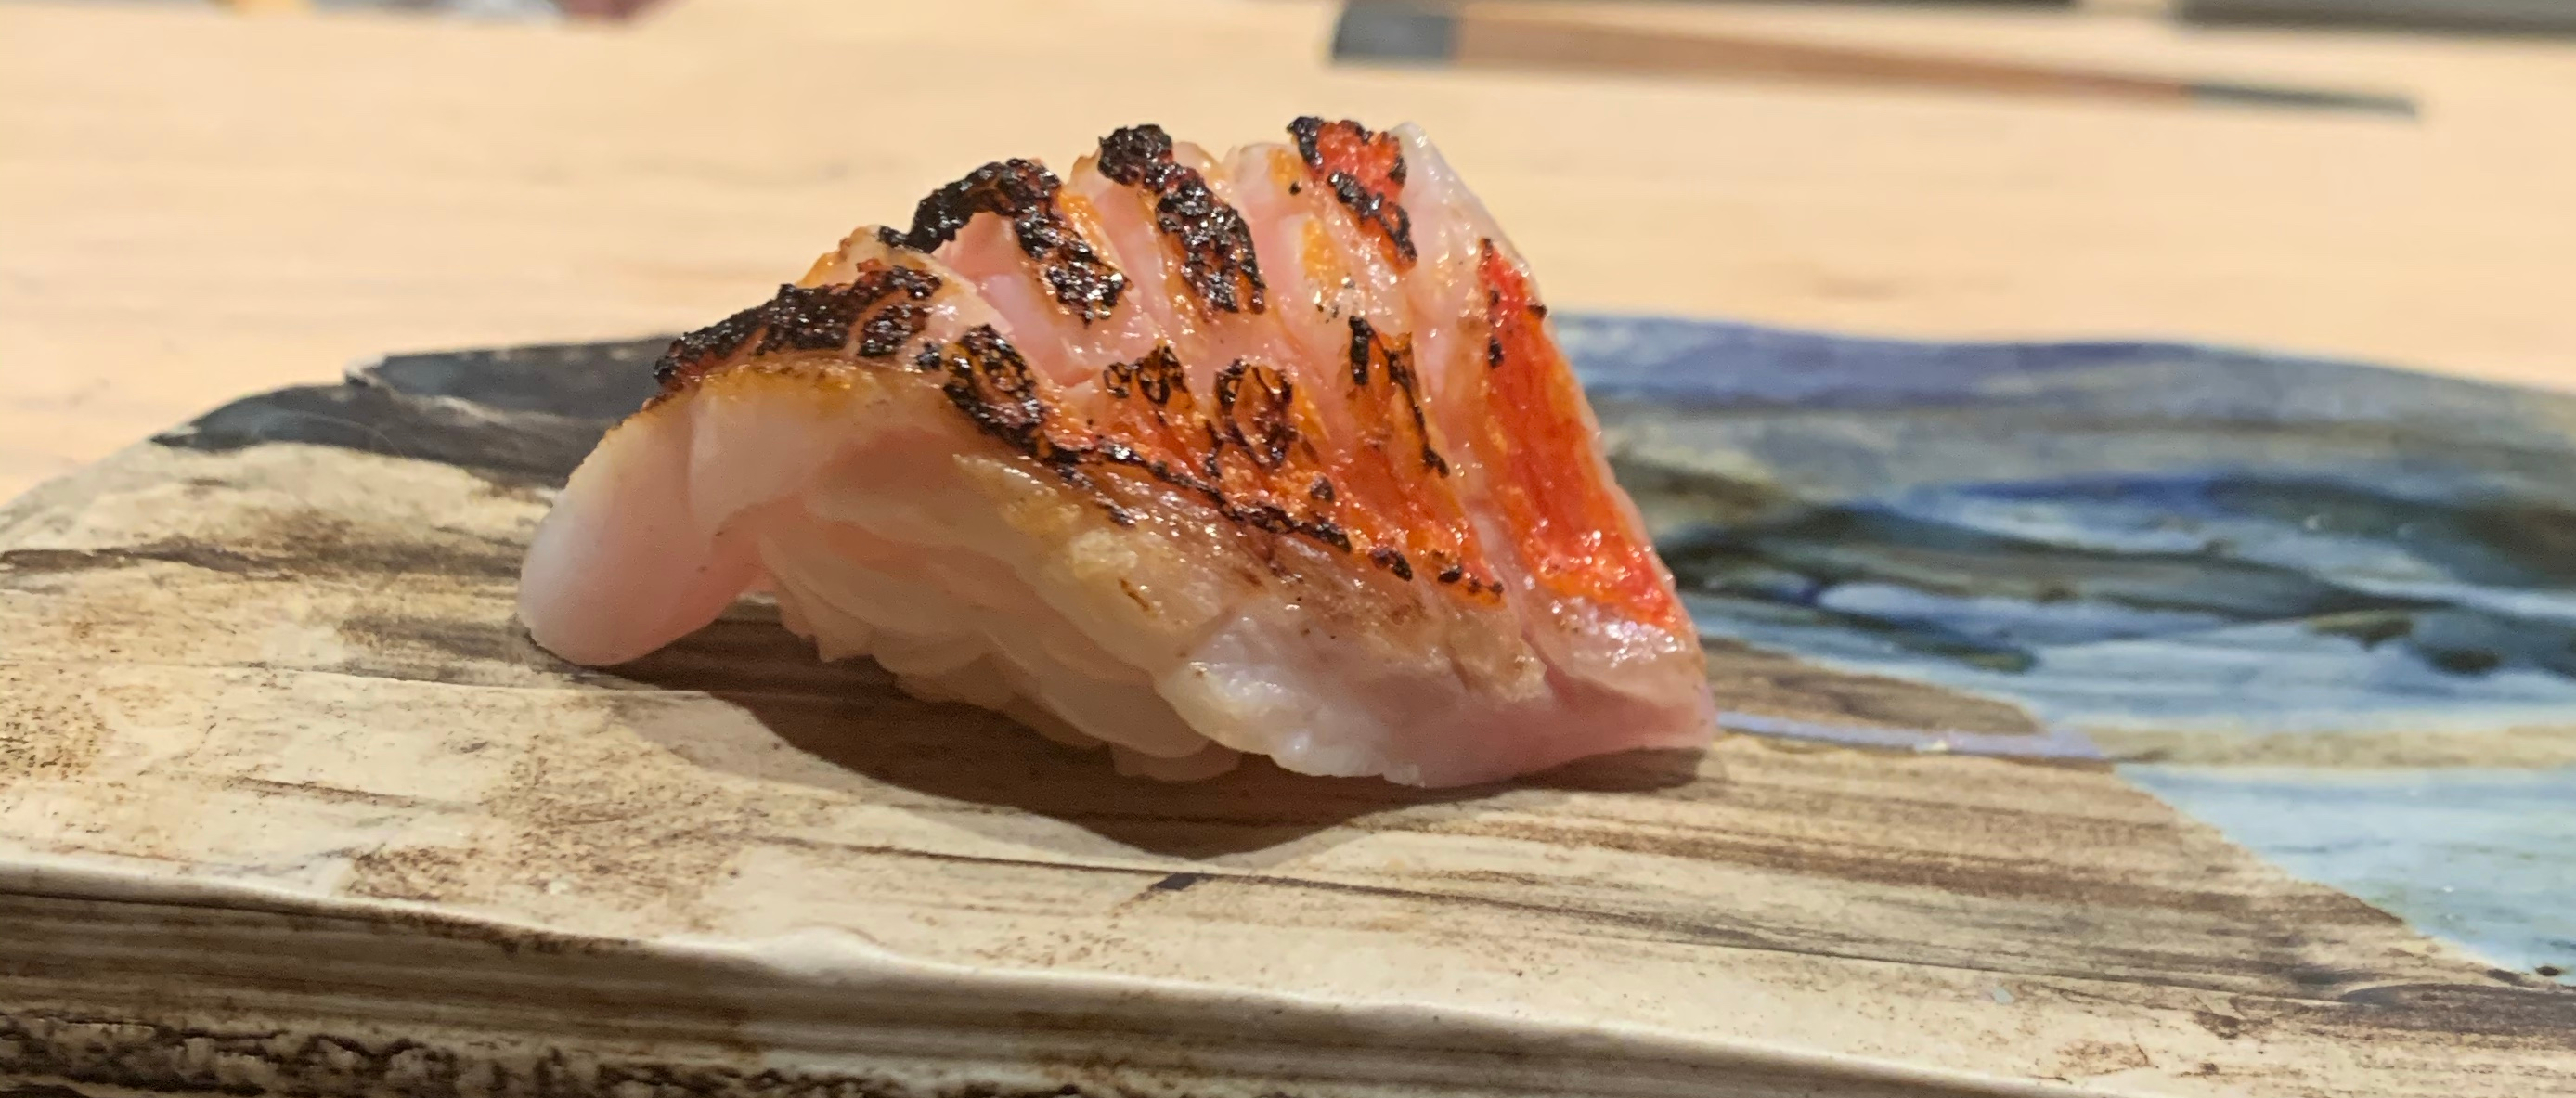 One piece of nigiri sushi, with a white fish that has been charred along slightly-raised natural ridges